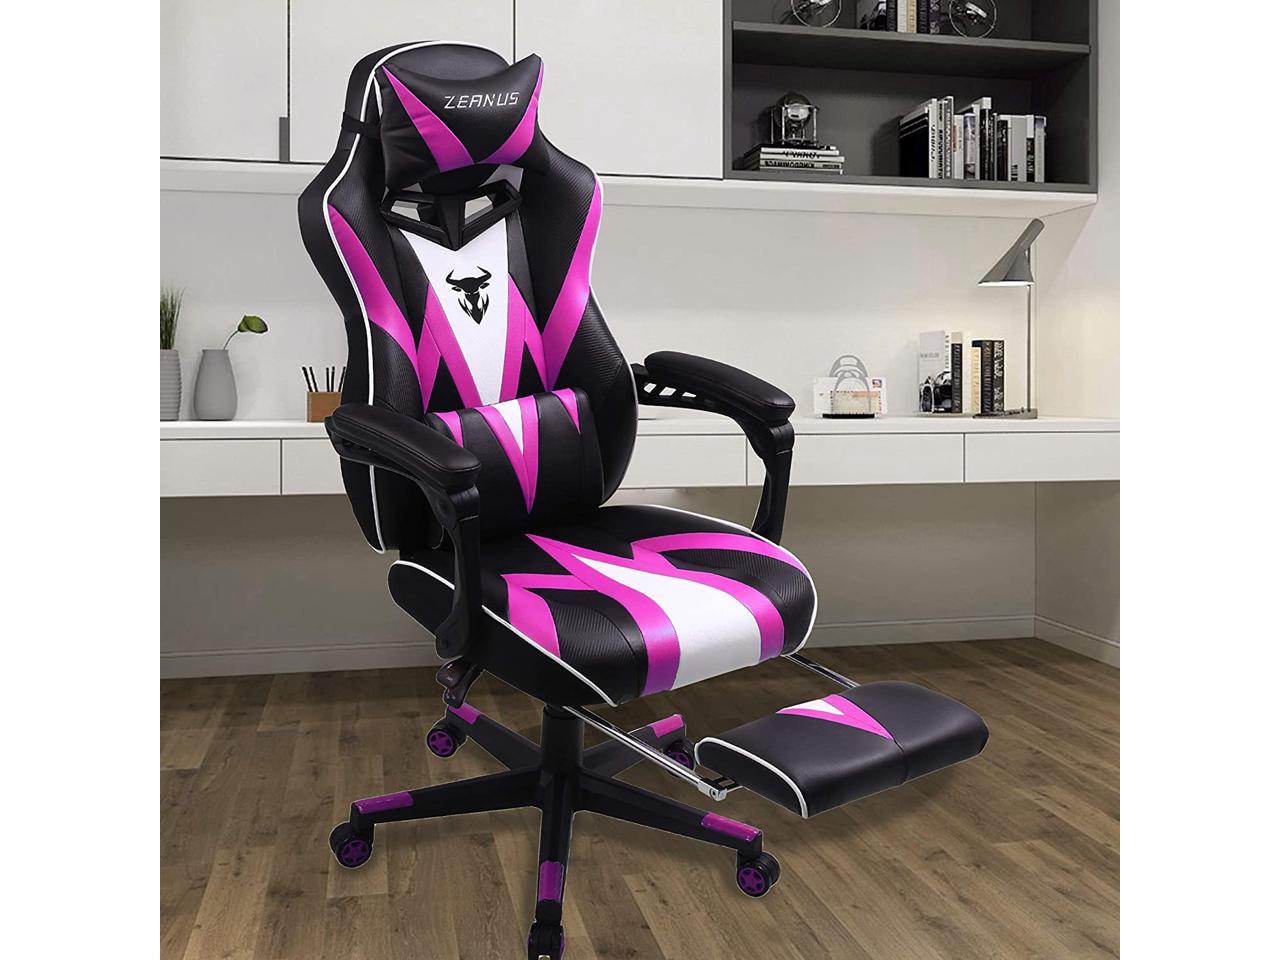 Zeanus Gaming chair with Footrest, Light Pink Gamer Chair